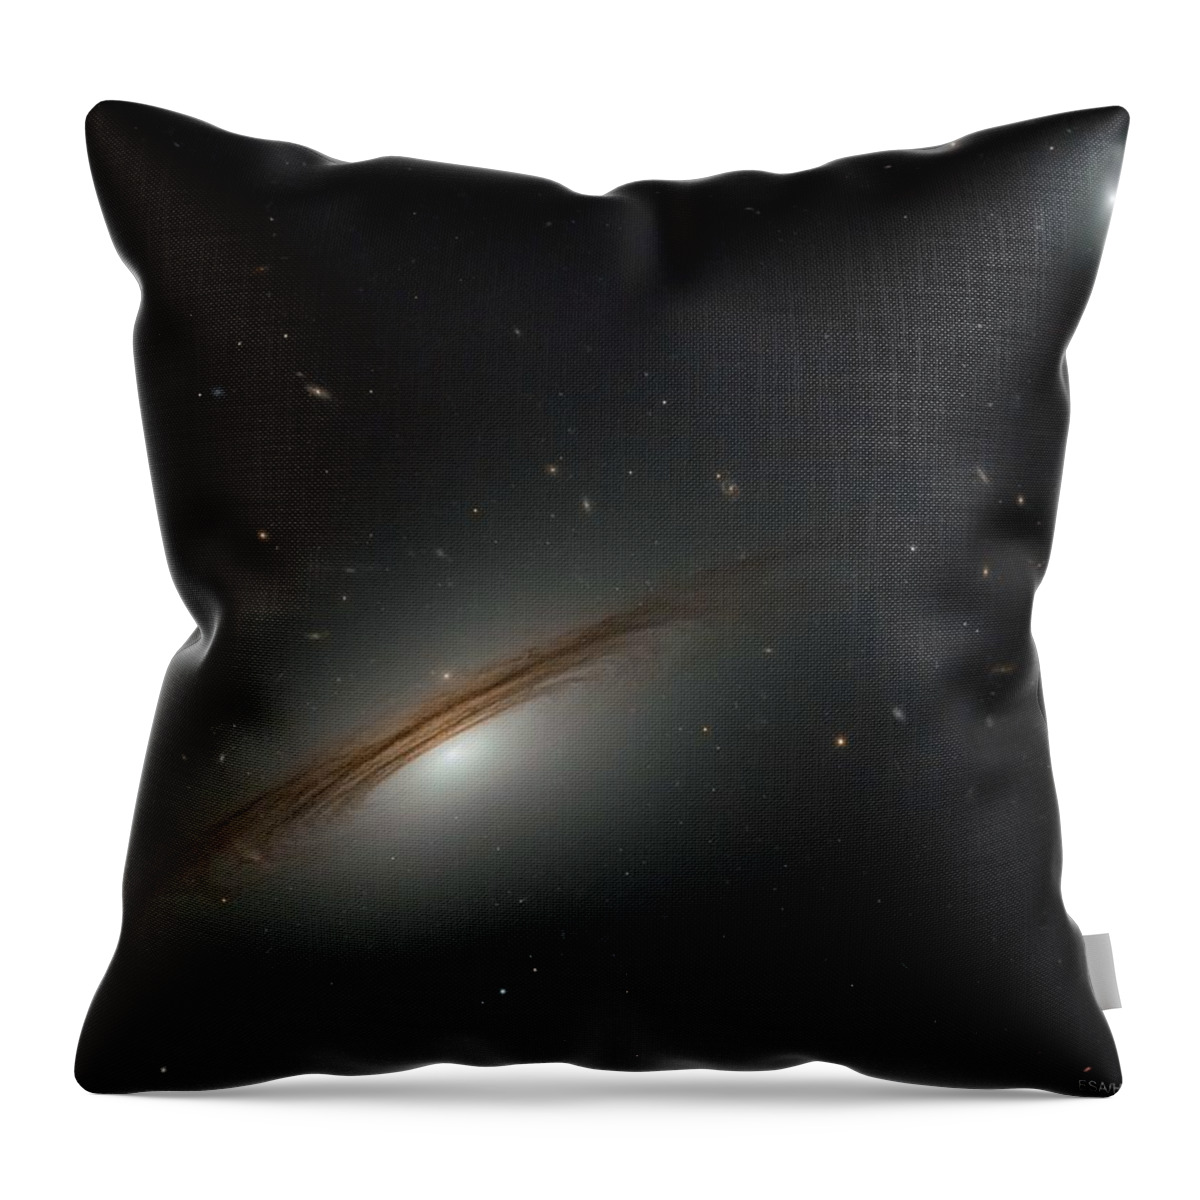 Background Throw Pillow featuring the painting UGC 12591 The Fastest Rotating Galaxy Known #1 by Celestial Images